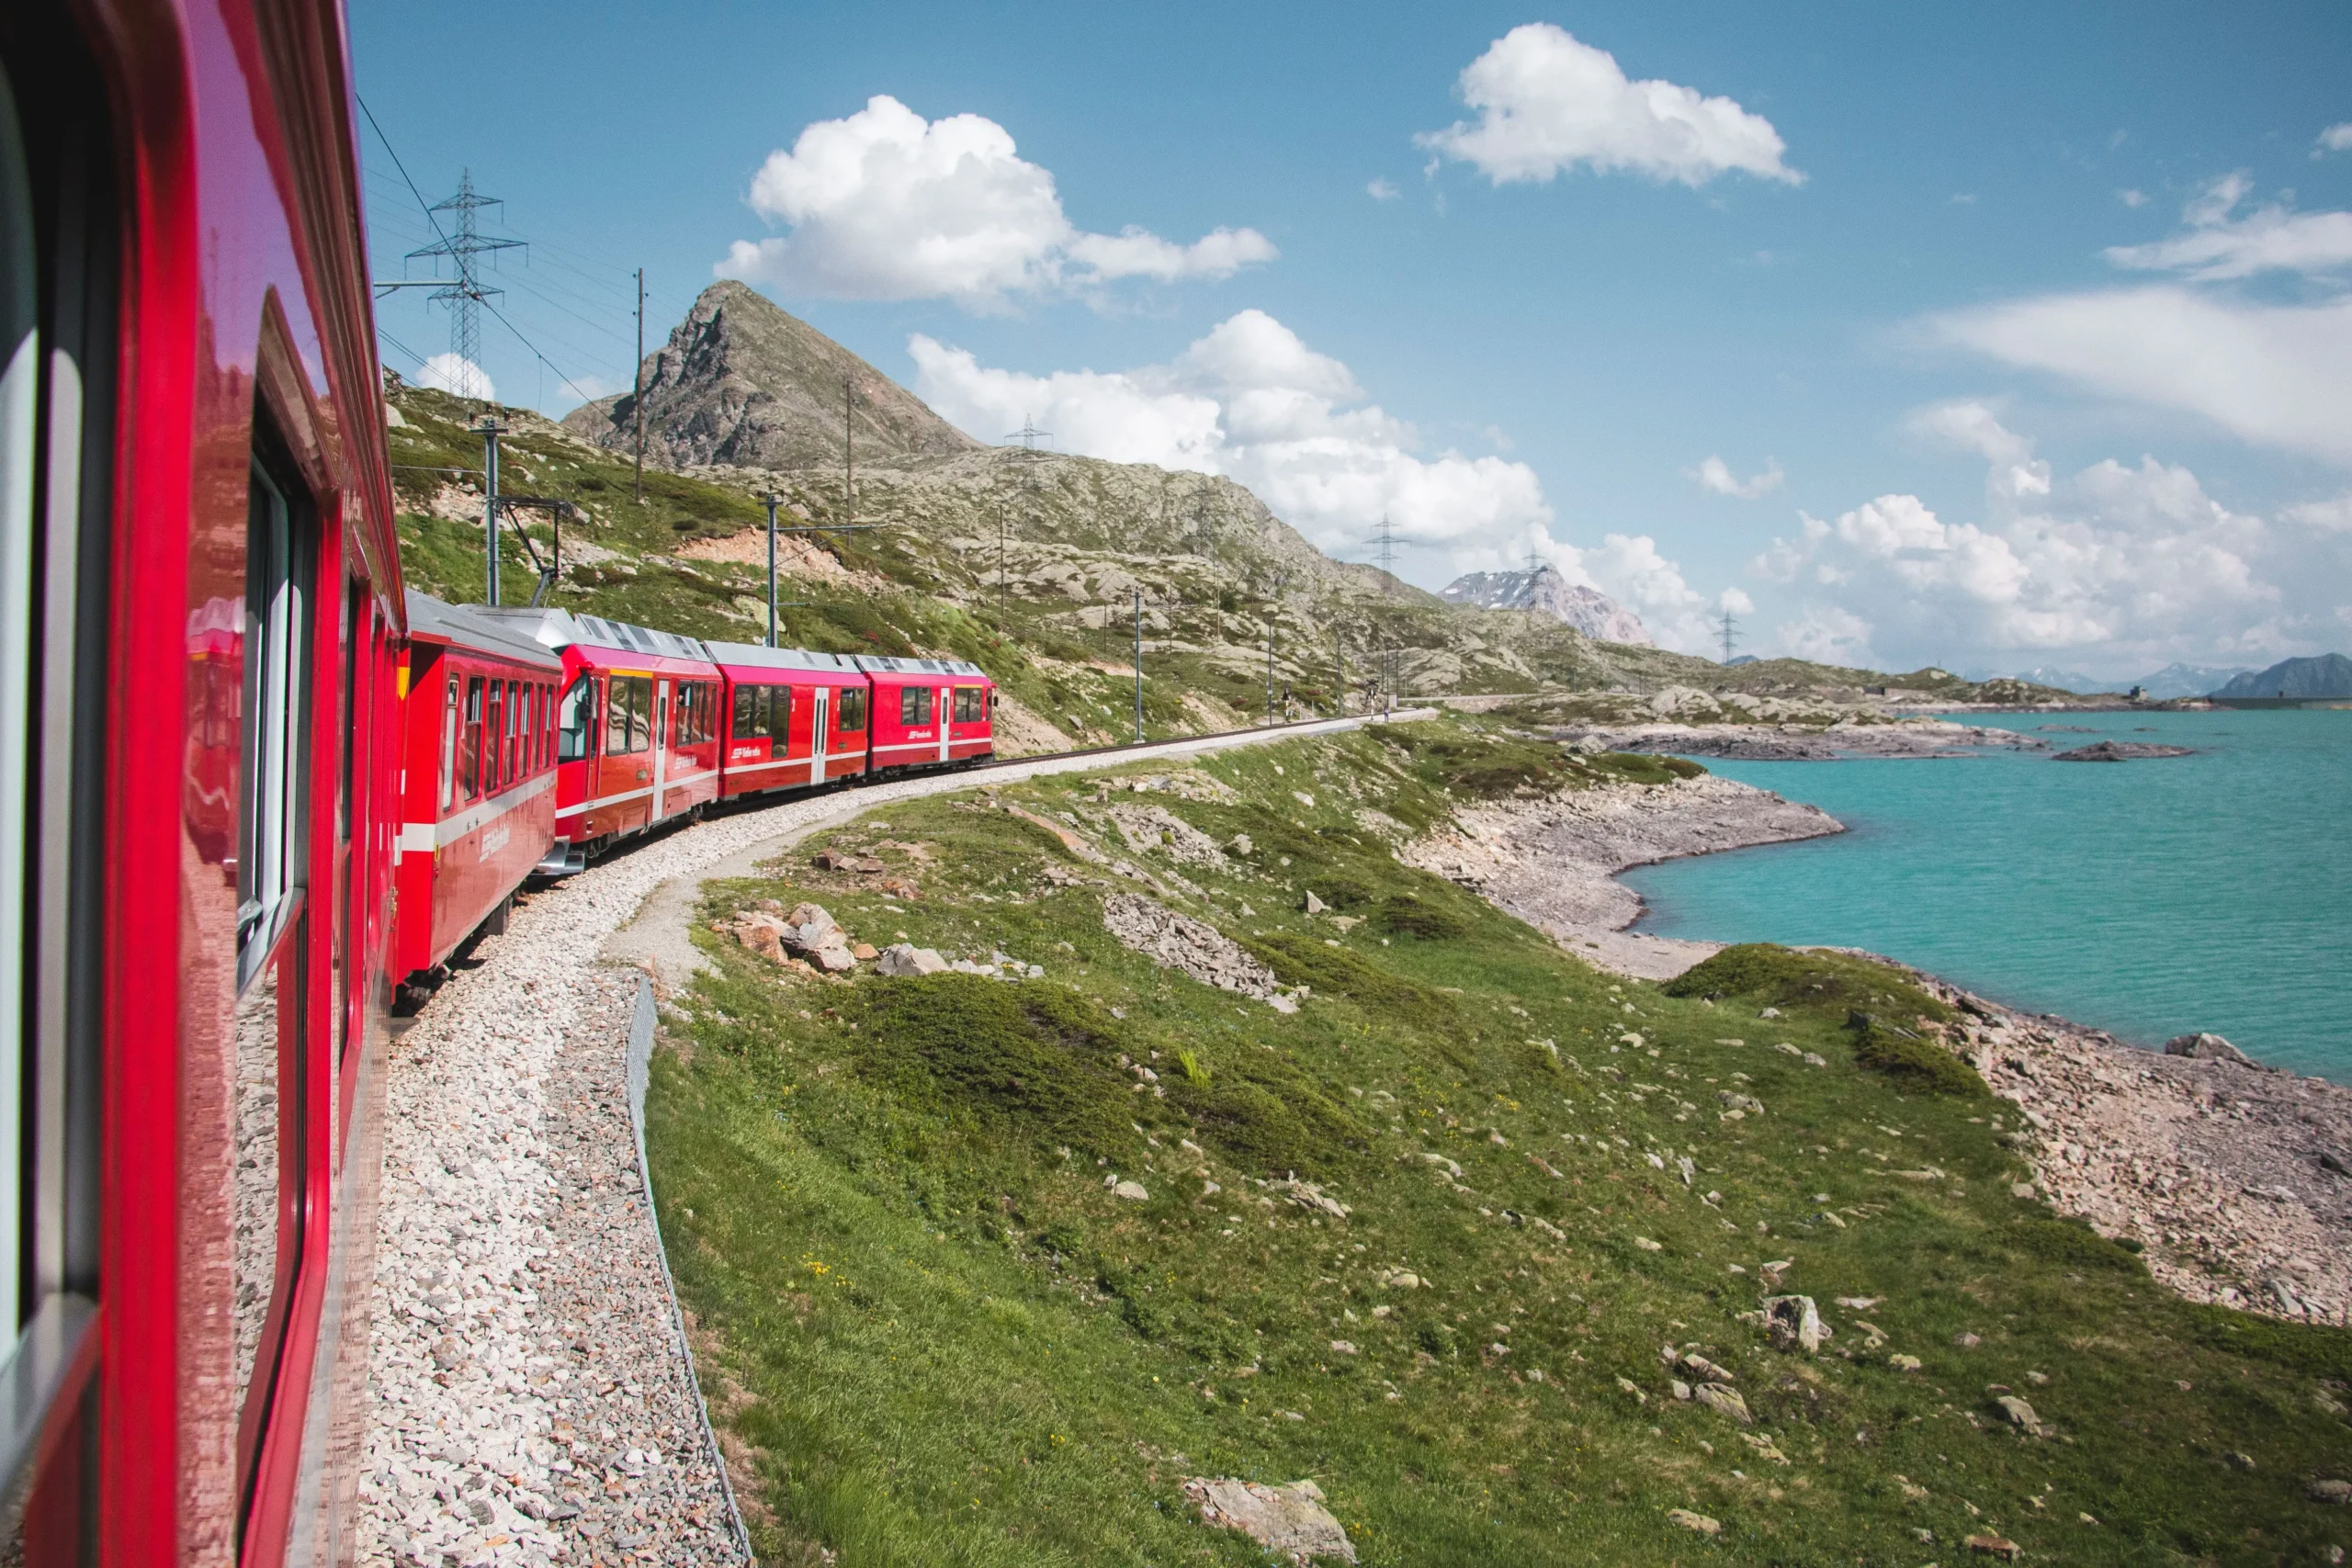 Bernina Express railway journey: Red train traversing railway with mountain lake beside, framed by lush green mountains in the backdrop.